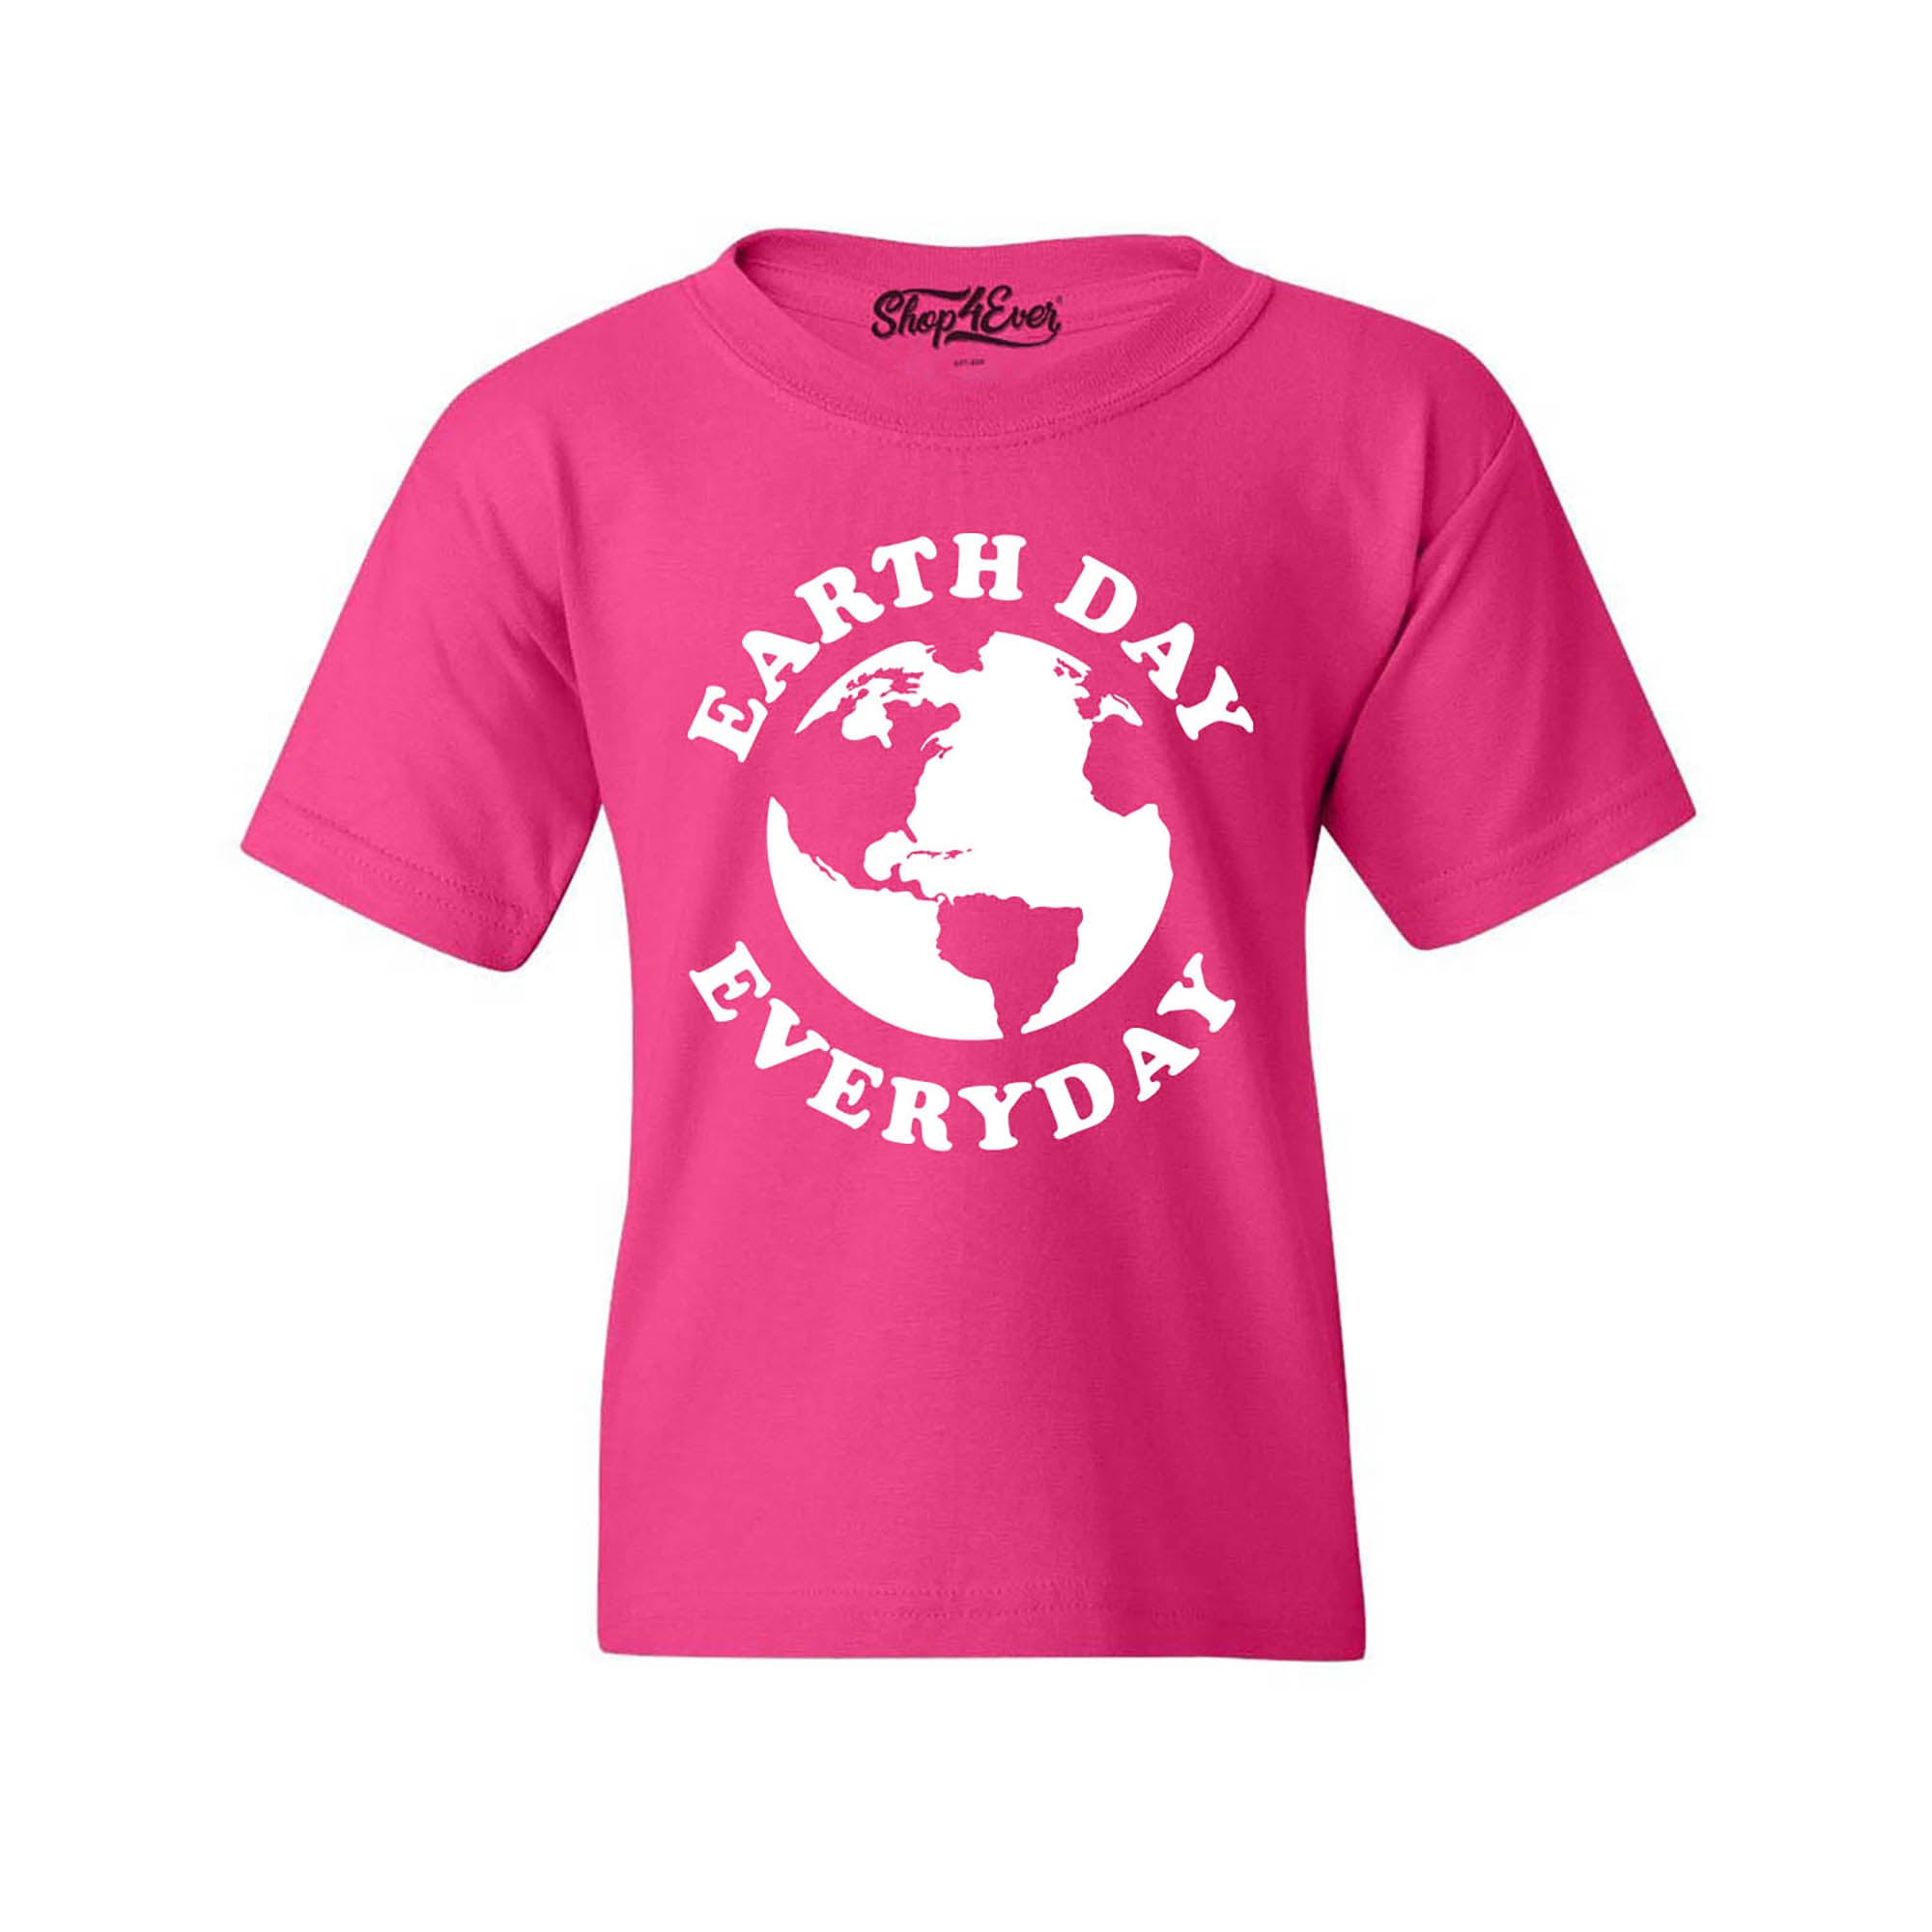 Earth Day Everyday Kids Child Tee Environmental Youth's T-Shirt